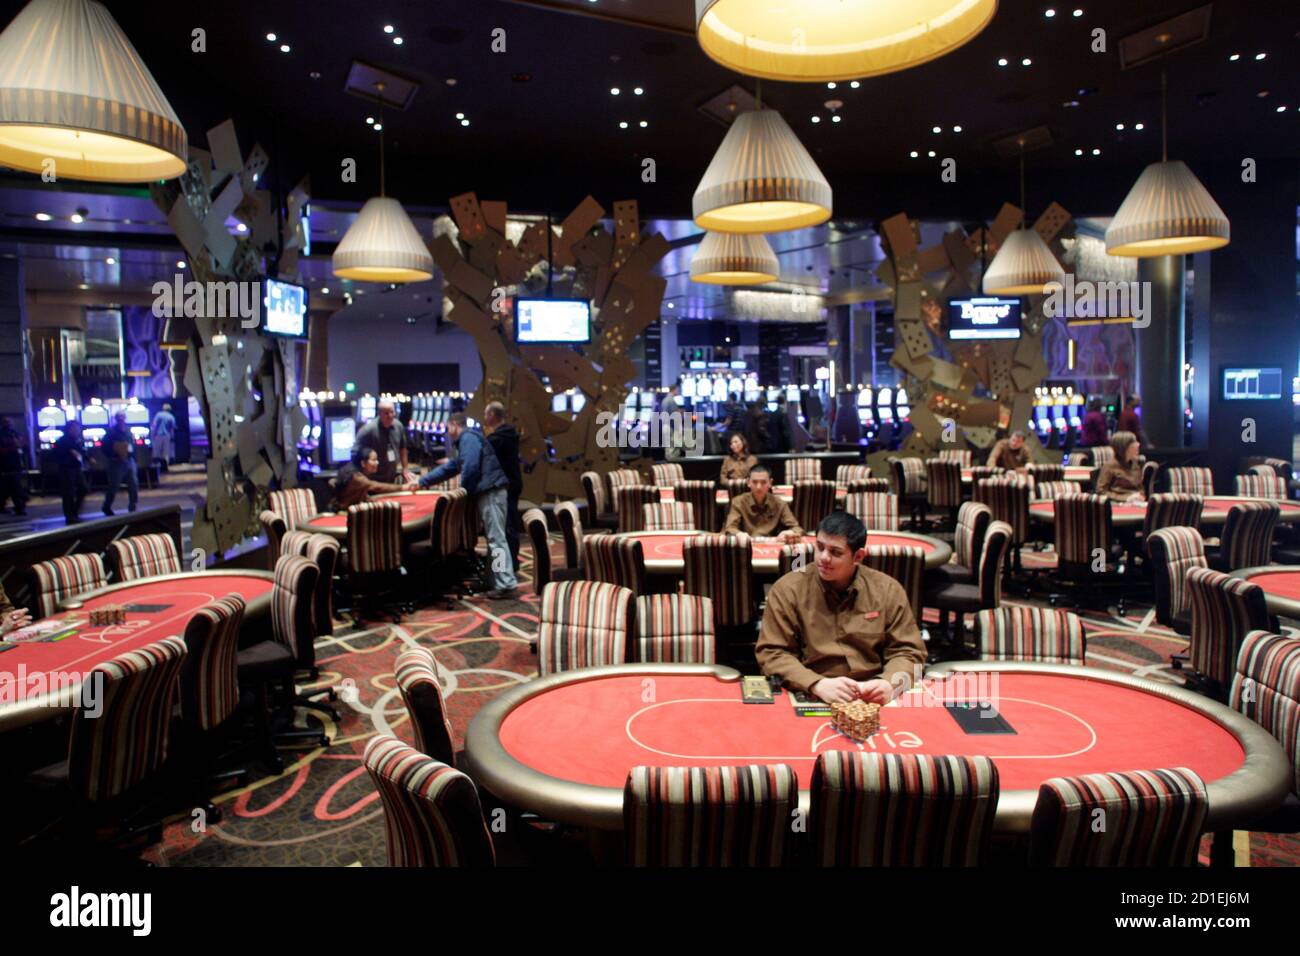 A view of the poker room at the Aria hotel-casino in Las Vegas, Nevada  December 14, 2009. Aria, the centerpiece of the $8.5 billion CityCenter  project, opens to the public December 16.